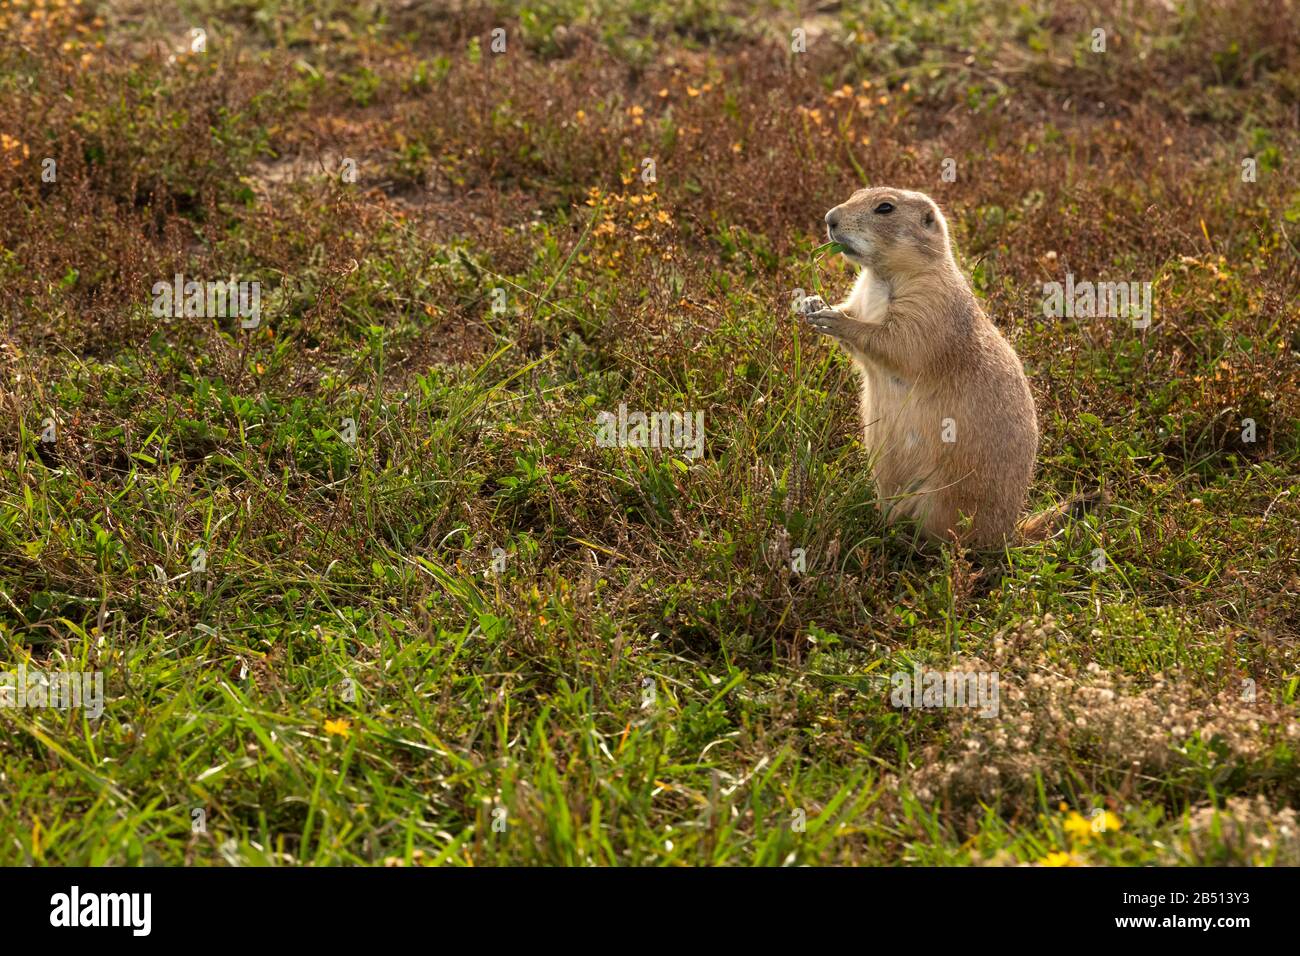 SD00317-00...SOUTH DAKOTA - A prairie dog enjoying a snack while watching tourist passing by at Roberts Prairie Dog Town in Badlands National Park. Stock Photo